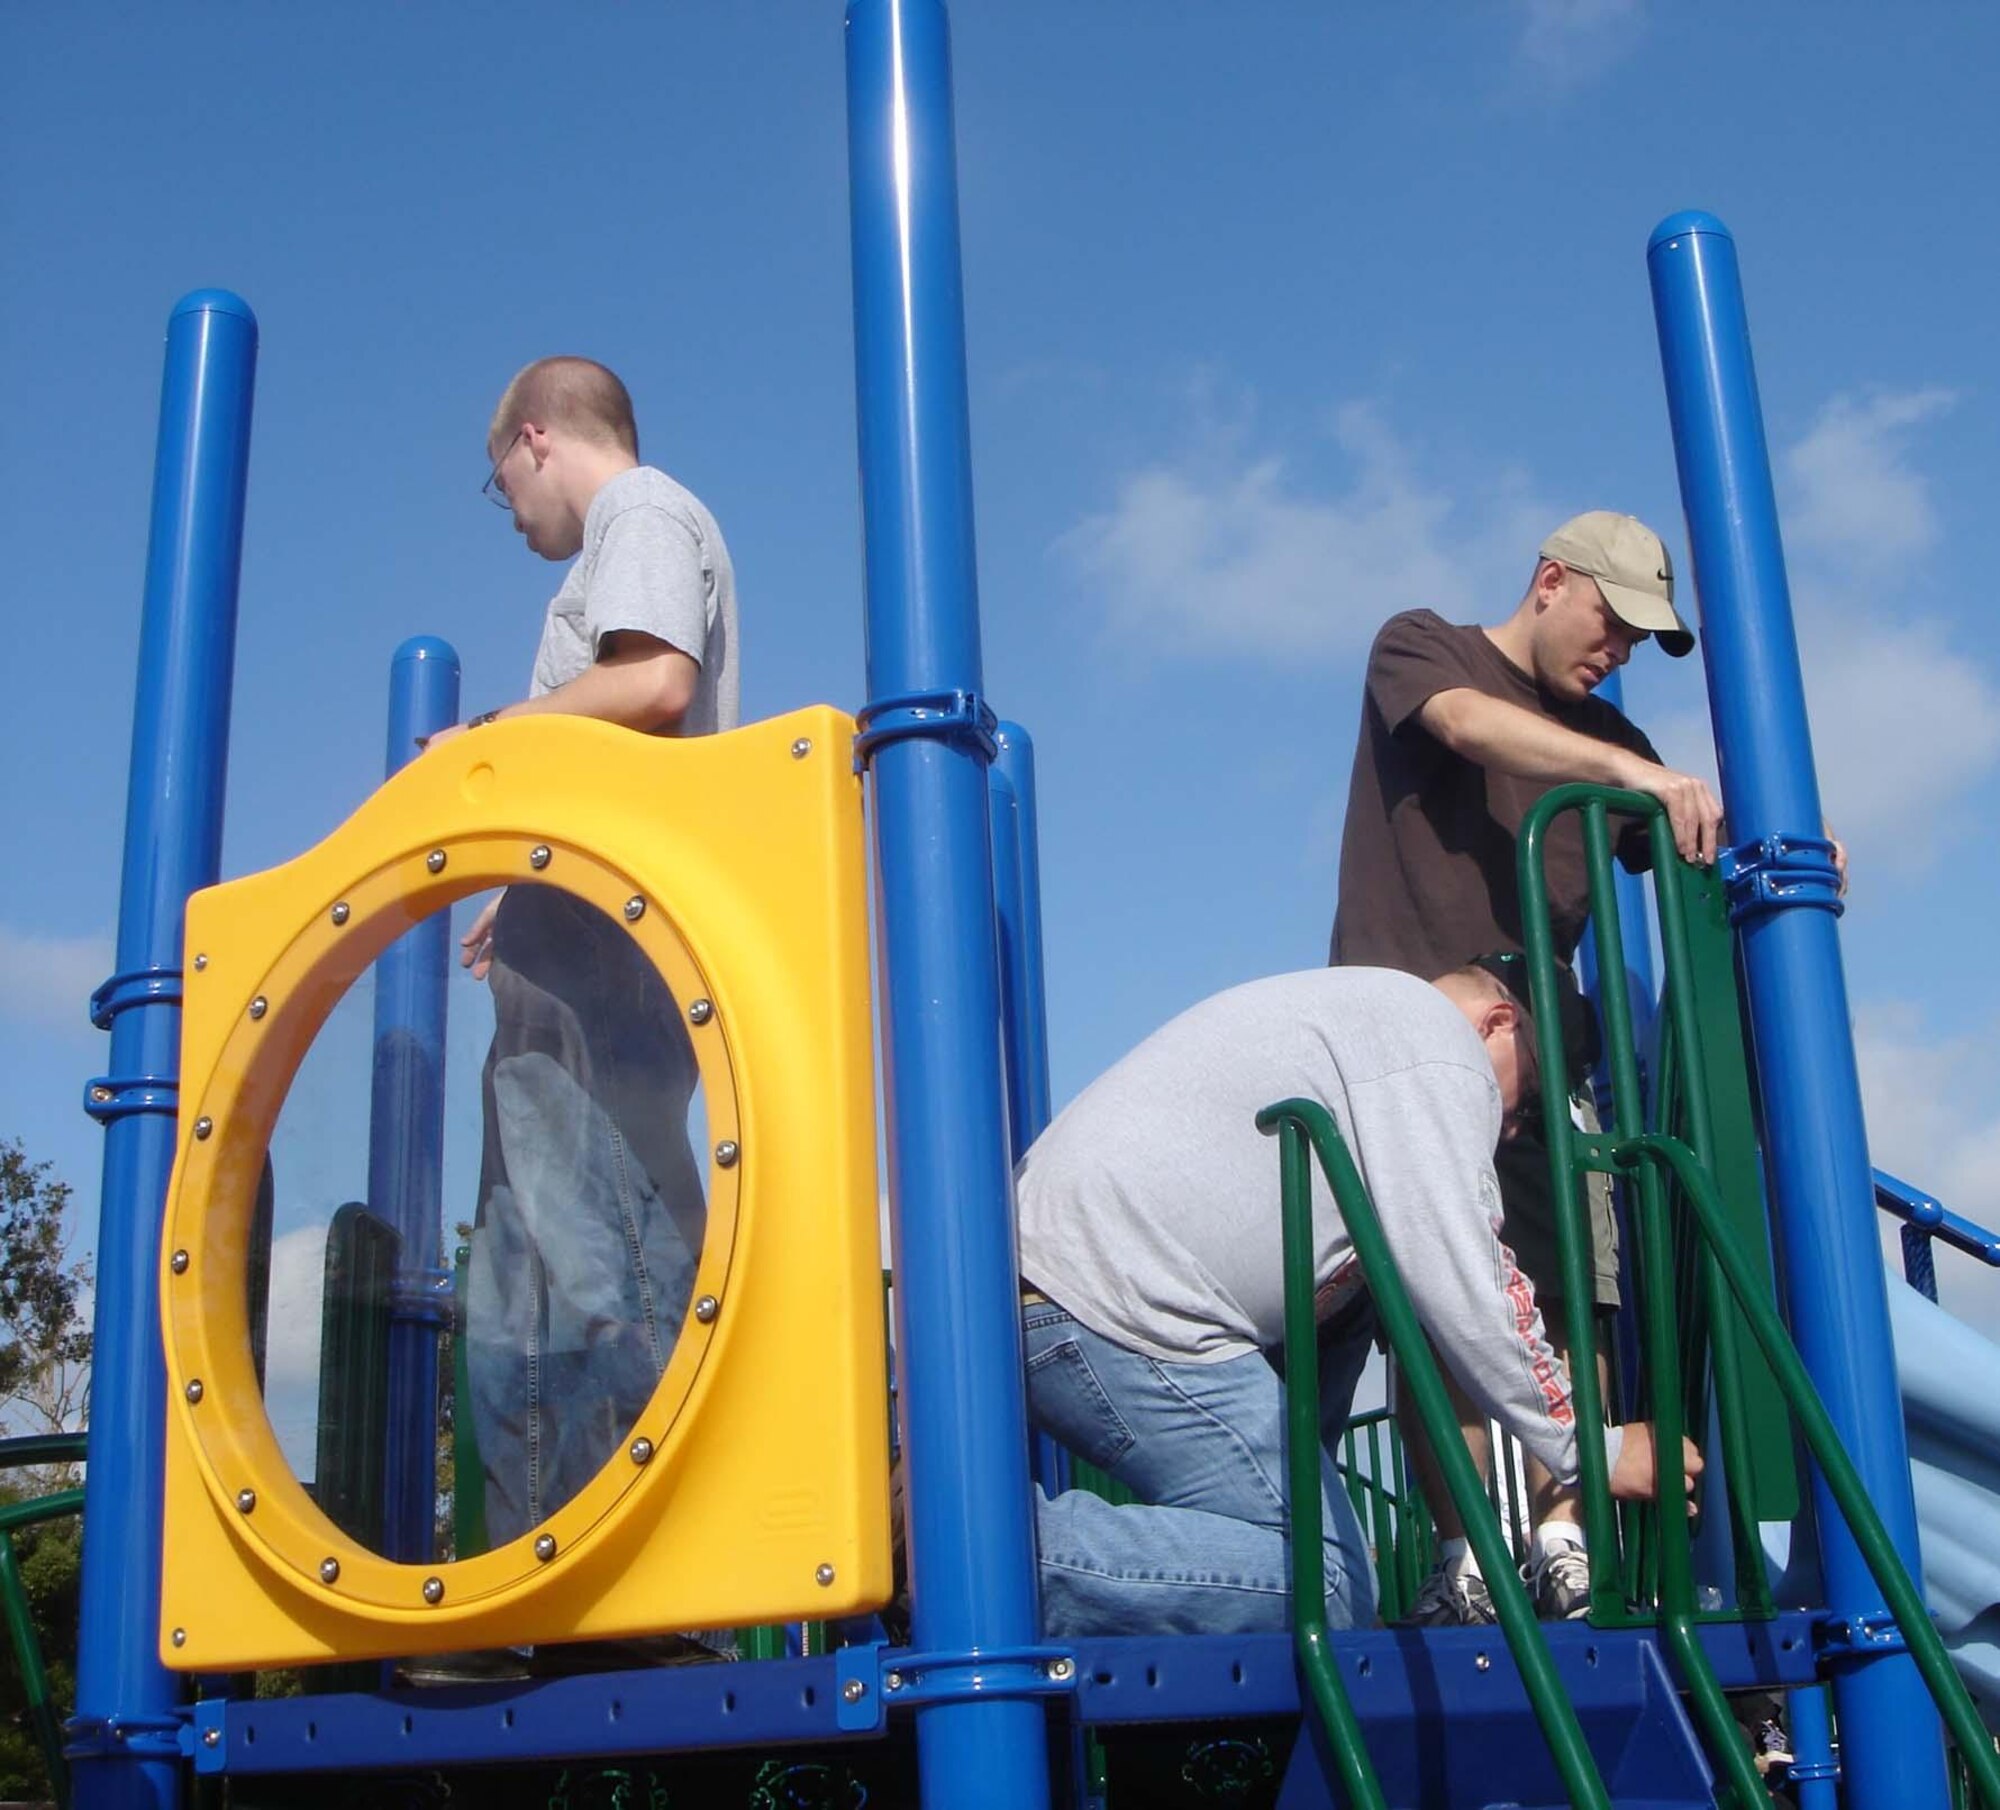 From left, Senior Airman Arron Eden, Tech. Sgt. Brian Yelton and Master Sgt. John Baliey put finishing touches on playground equipment at Gorenflo Elementary School in Biloxi. The trio and 17 other members of the 81st Training Support Squadron gave up their Nov. 11 for the humanitarian project. (U.S. Air Force photo by Maj. Paul Lips)